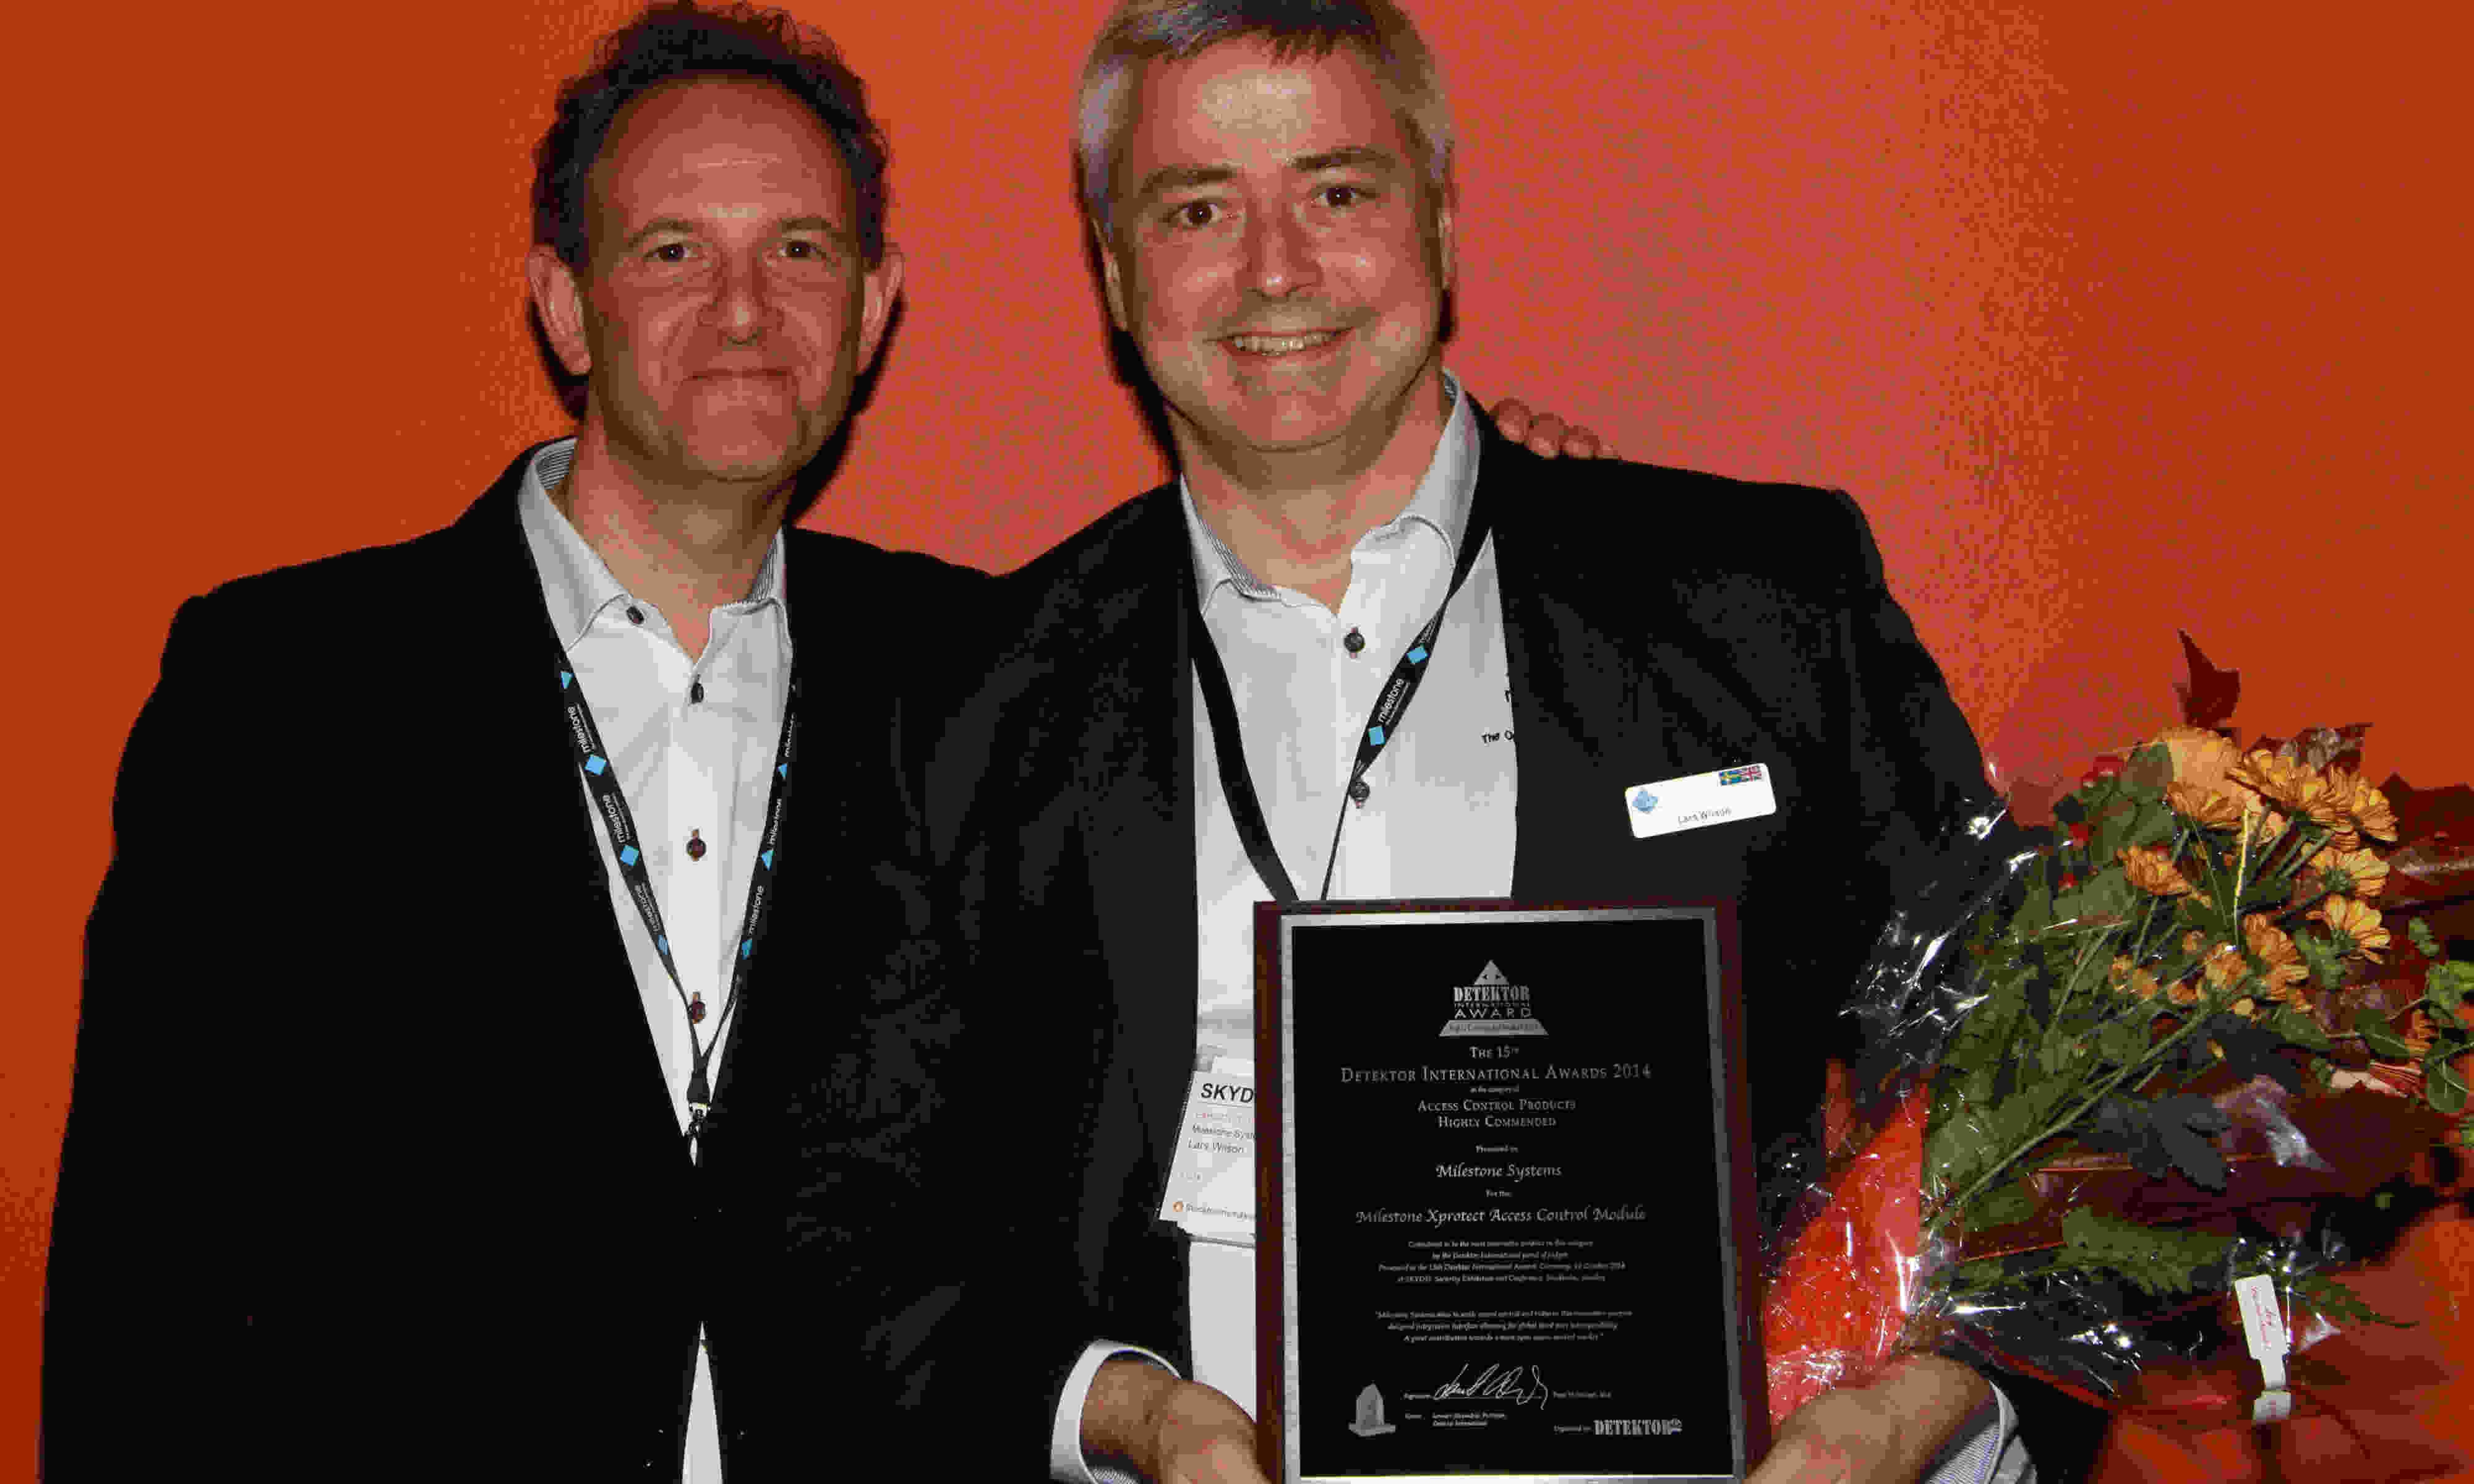 Milestone Systems receives awards for innovative open platform video projects and products